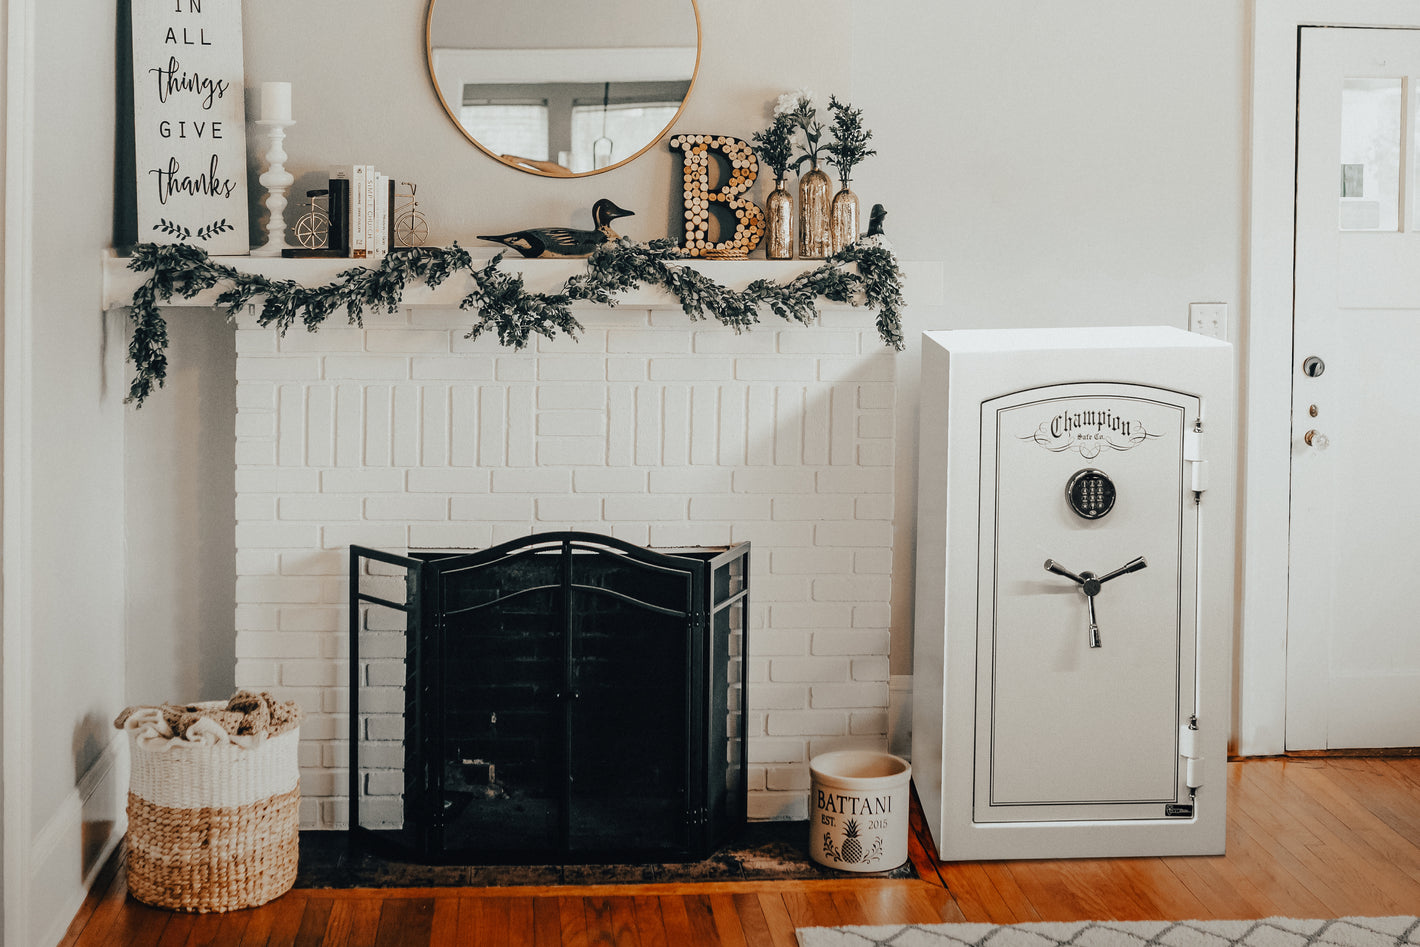 A smaller white gloss Home Safe from Champion Safe, Its placed next to a fireplace on hardwood floors to let you know that a home safe can be placed on wood floors and can be a piece of furniture to add decor to a room while still being a secure safe.